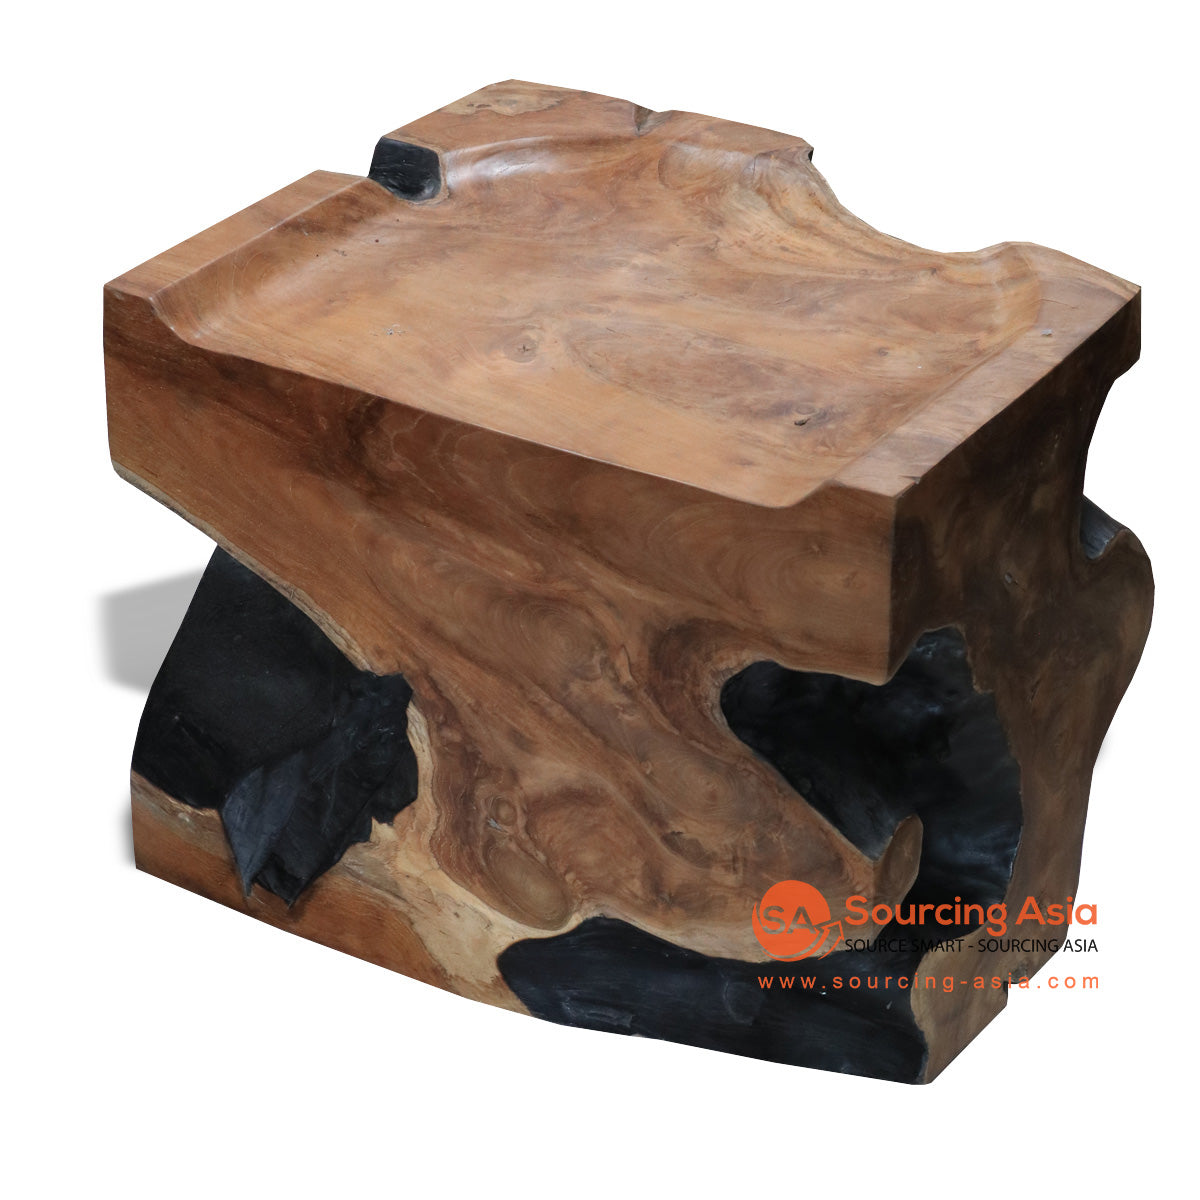 BMW266-1 NATURAL TEAK ROOT STOOL AND SIDE TABLE